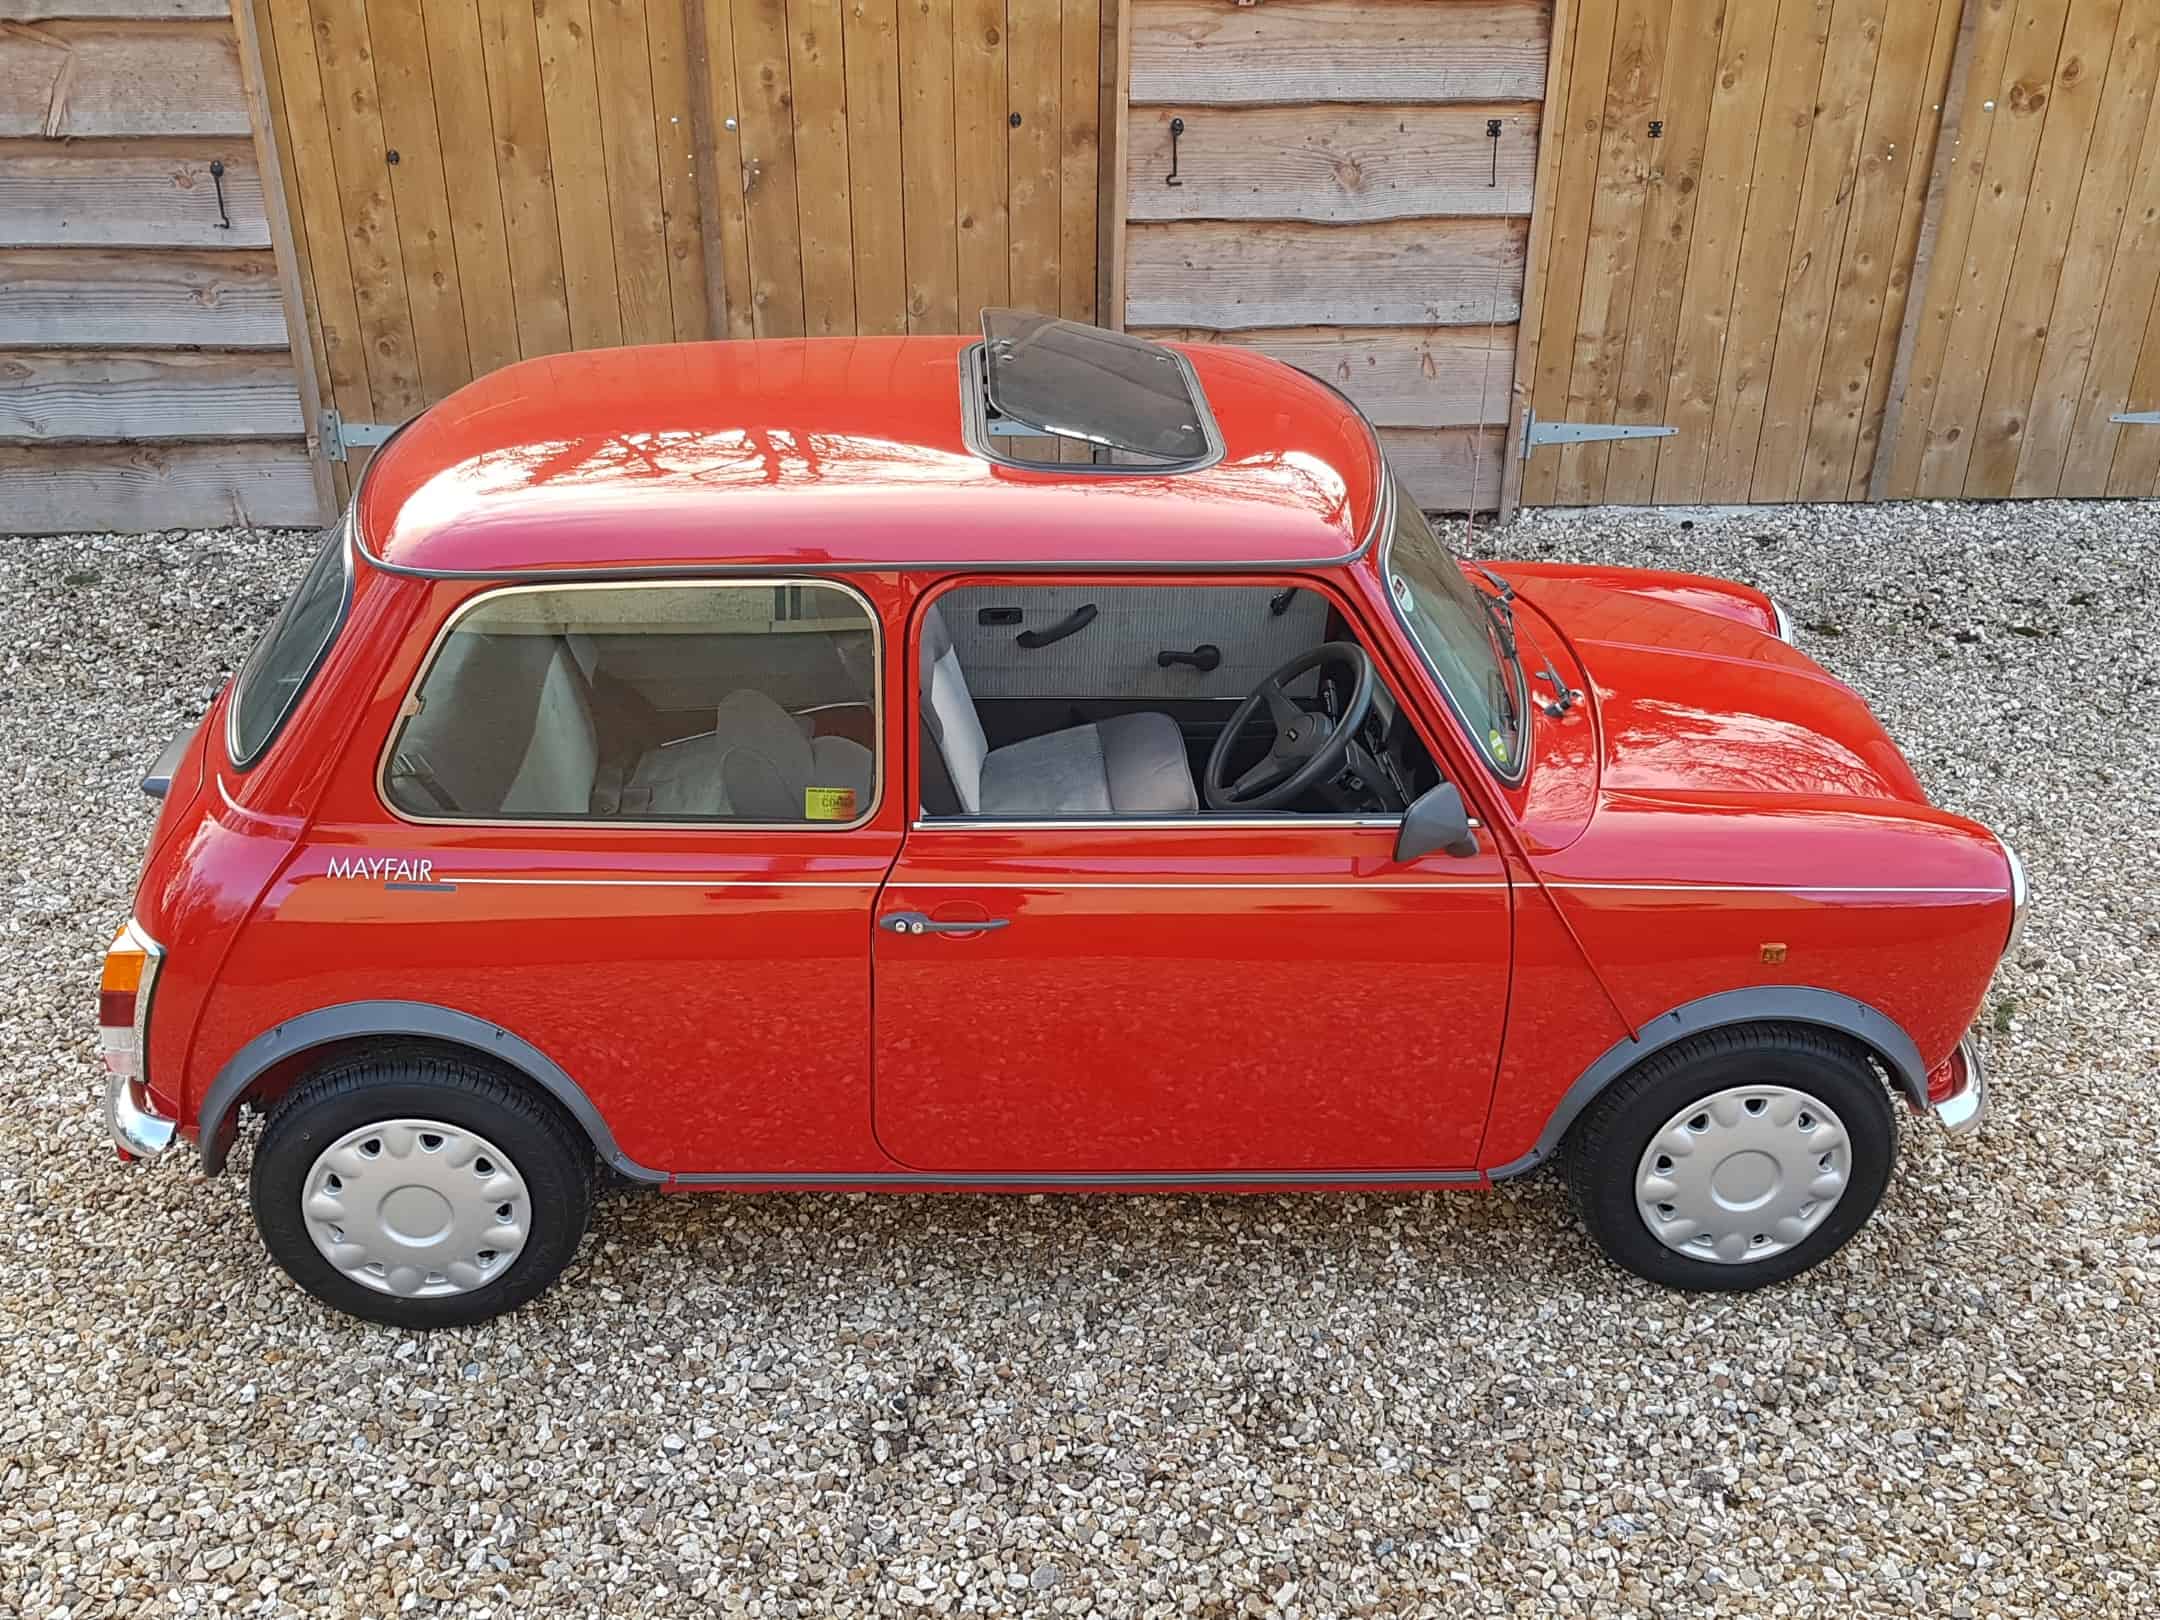 ** NOW SOLD ** Mini Mayfair Automatic On 2810 Miles From New!